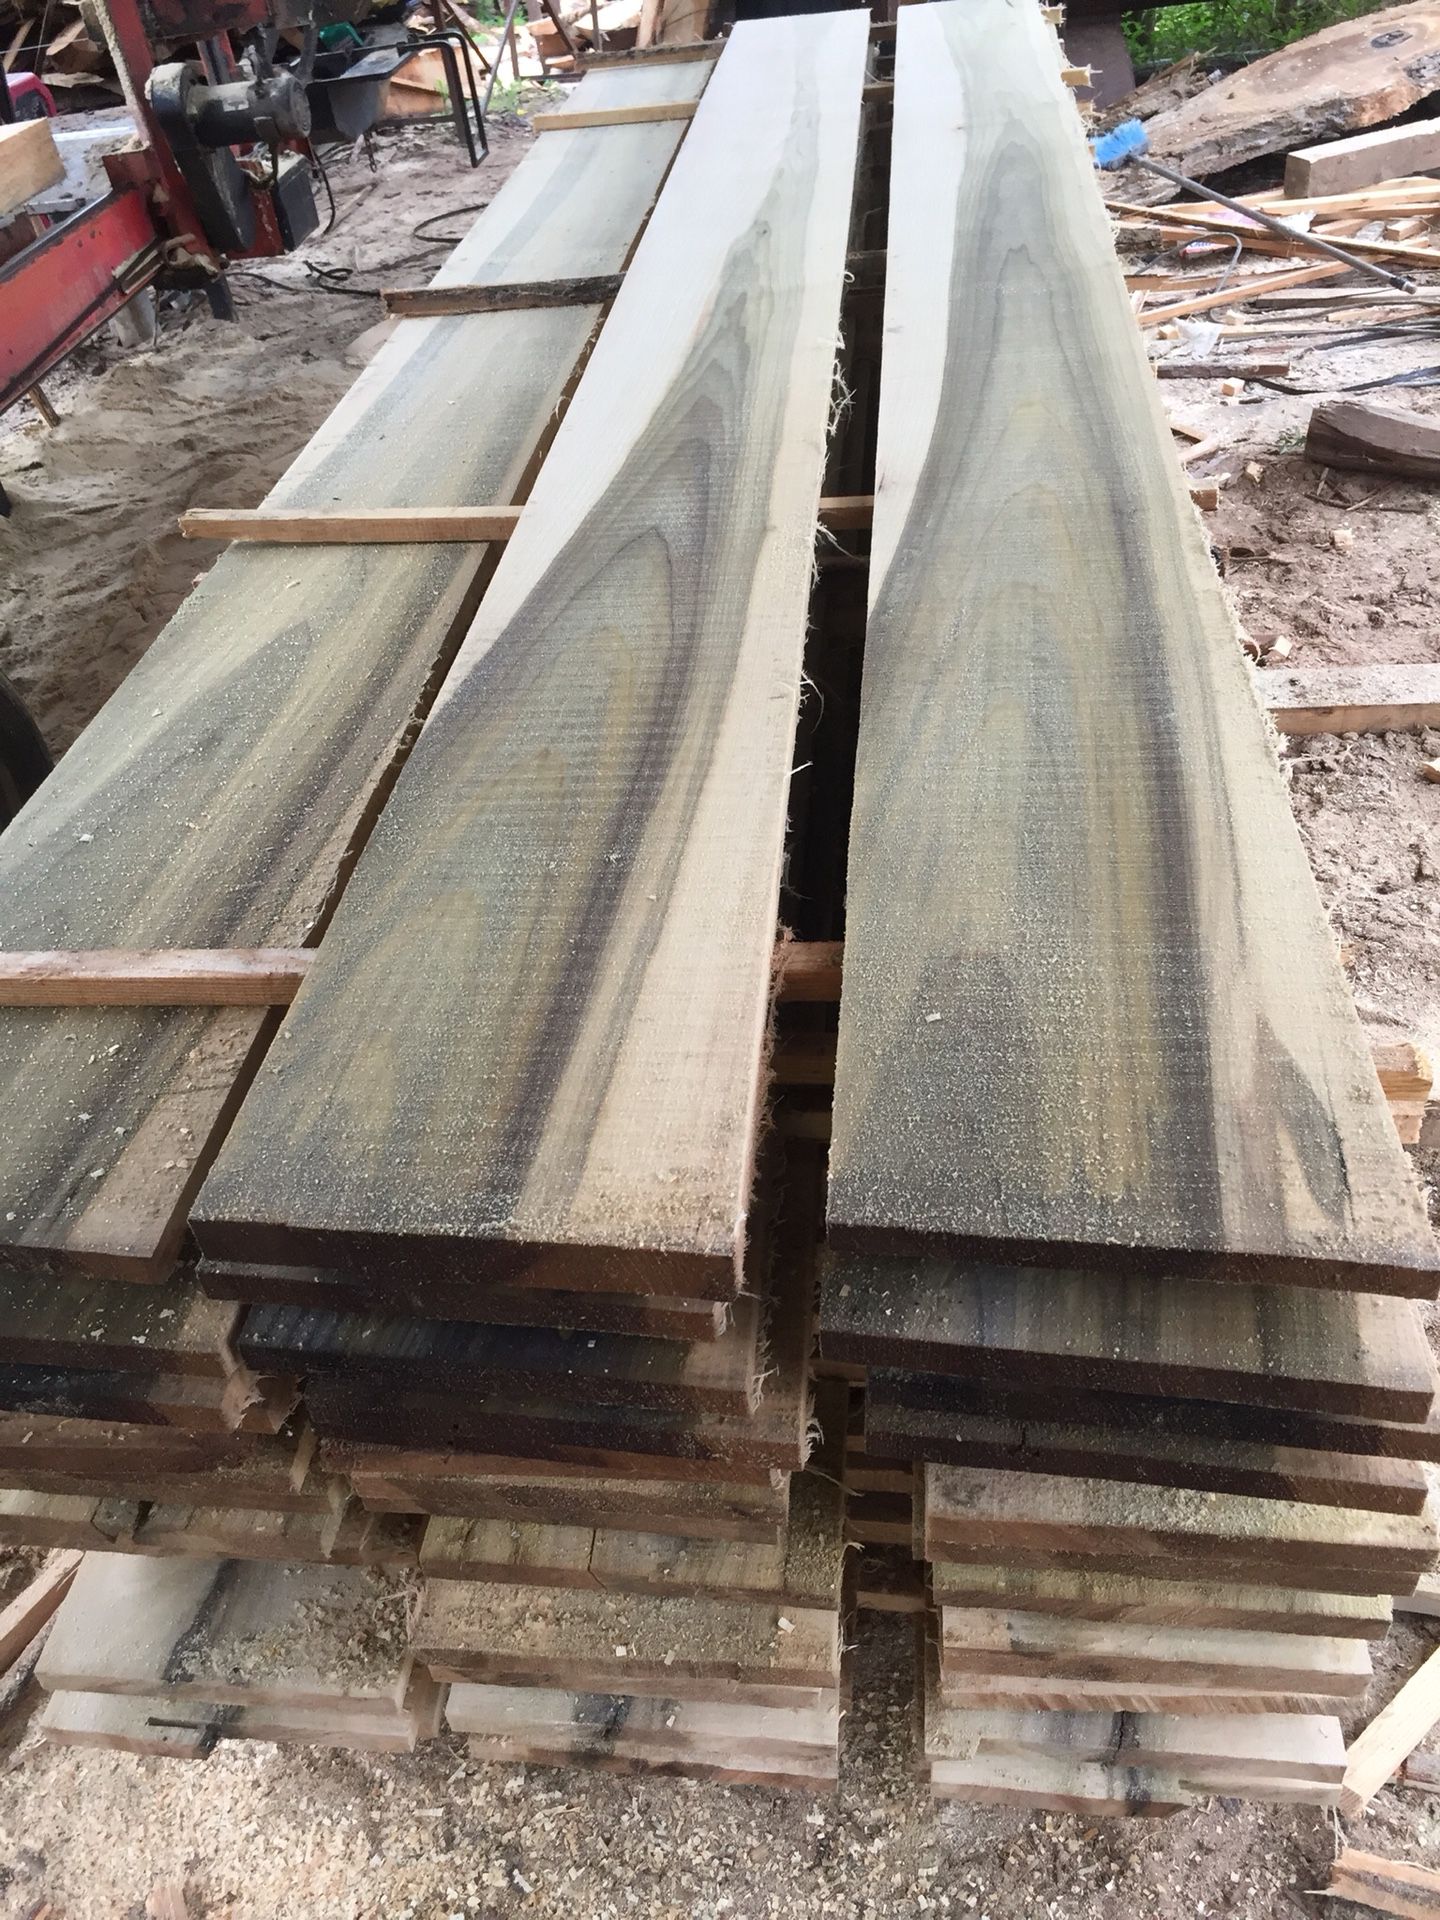 Poplar lumber for sale. 1x12’s and other sizes